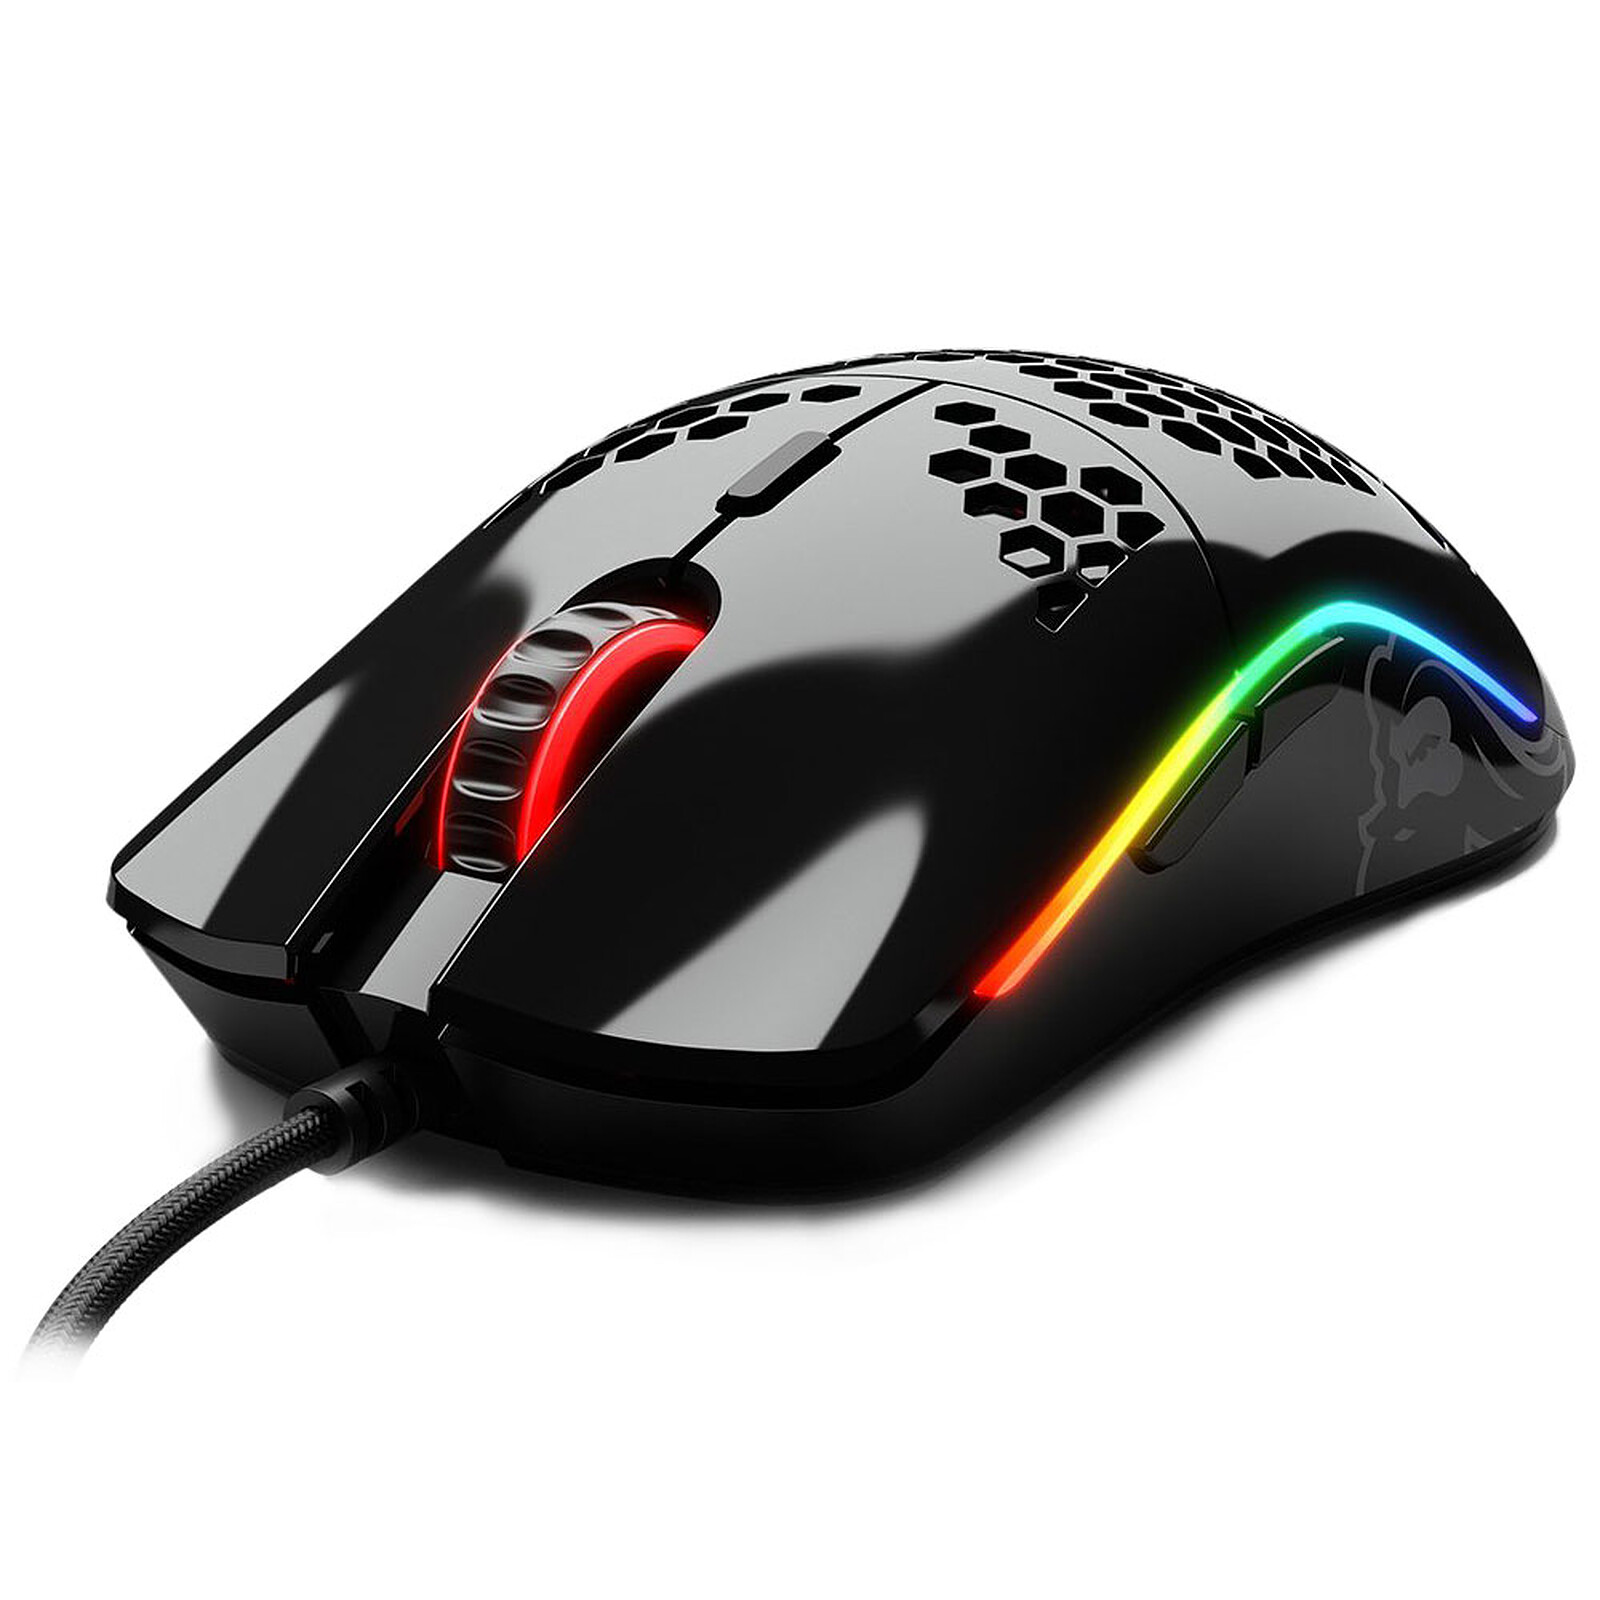 Glorious Model O Minus Black Gloss Mouse Glorious Pc Gaming Race On Ldlc